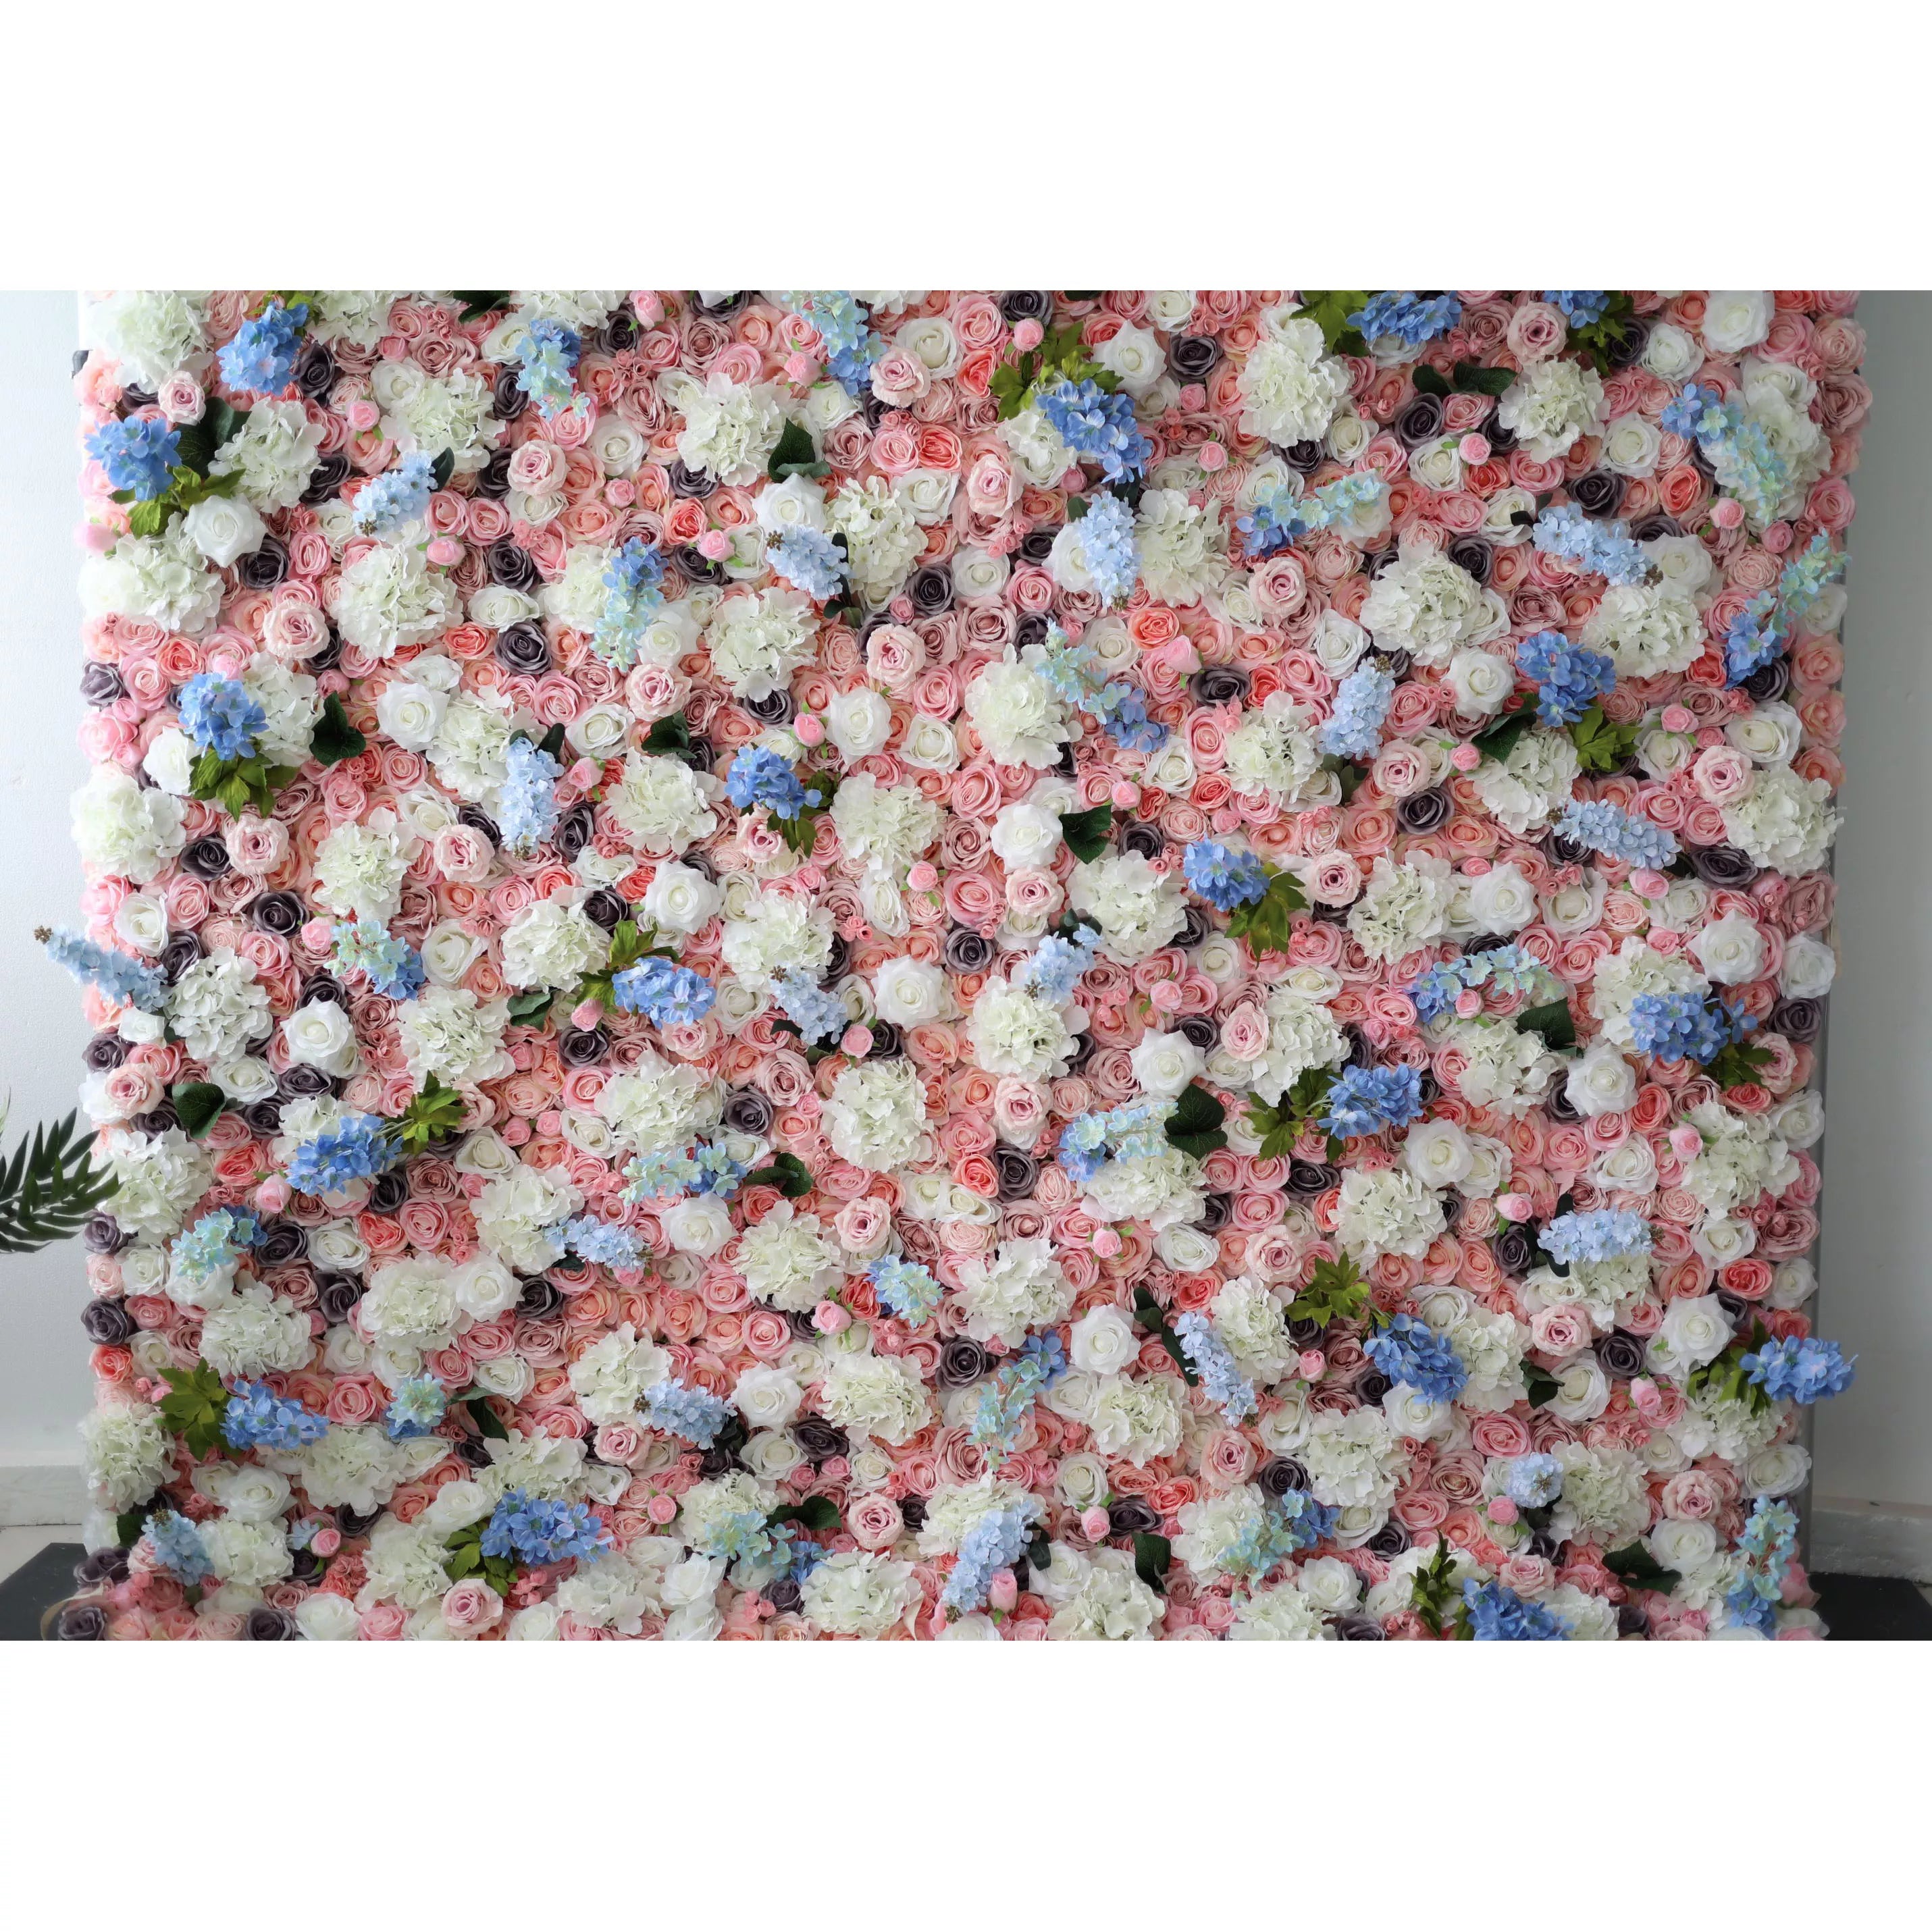 Valar Flowers roll up fabric artificial flower wall for wedding backdrop, floral party decor, and event photography, model VF-1283